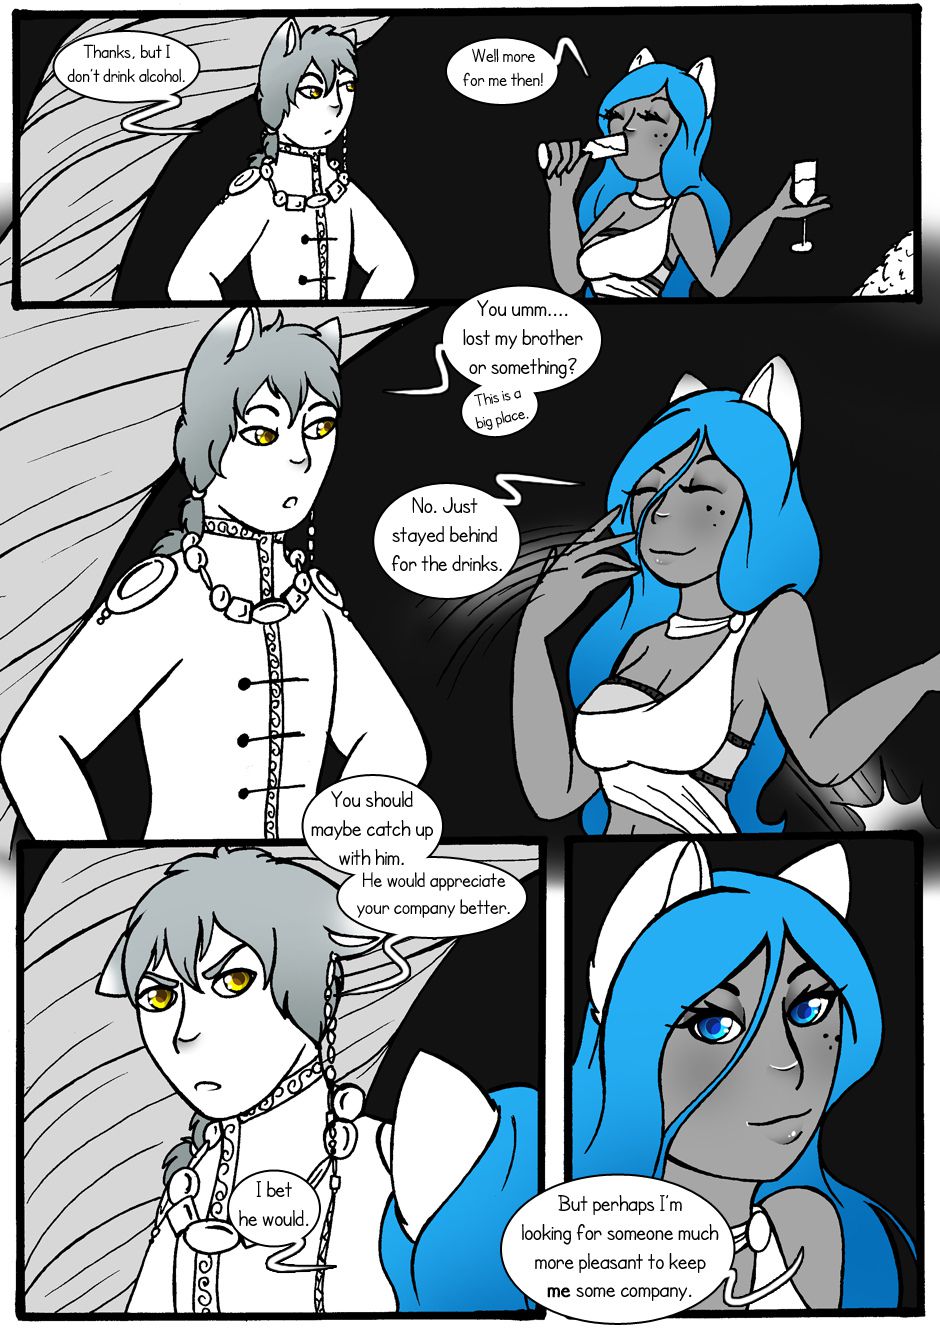 [Jeny-jen94] Between Kings and Queens [Ongoing] 32